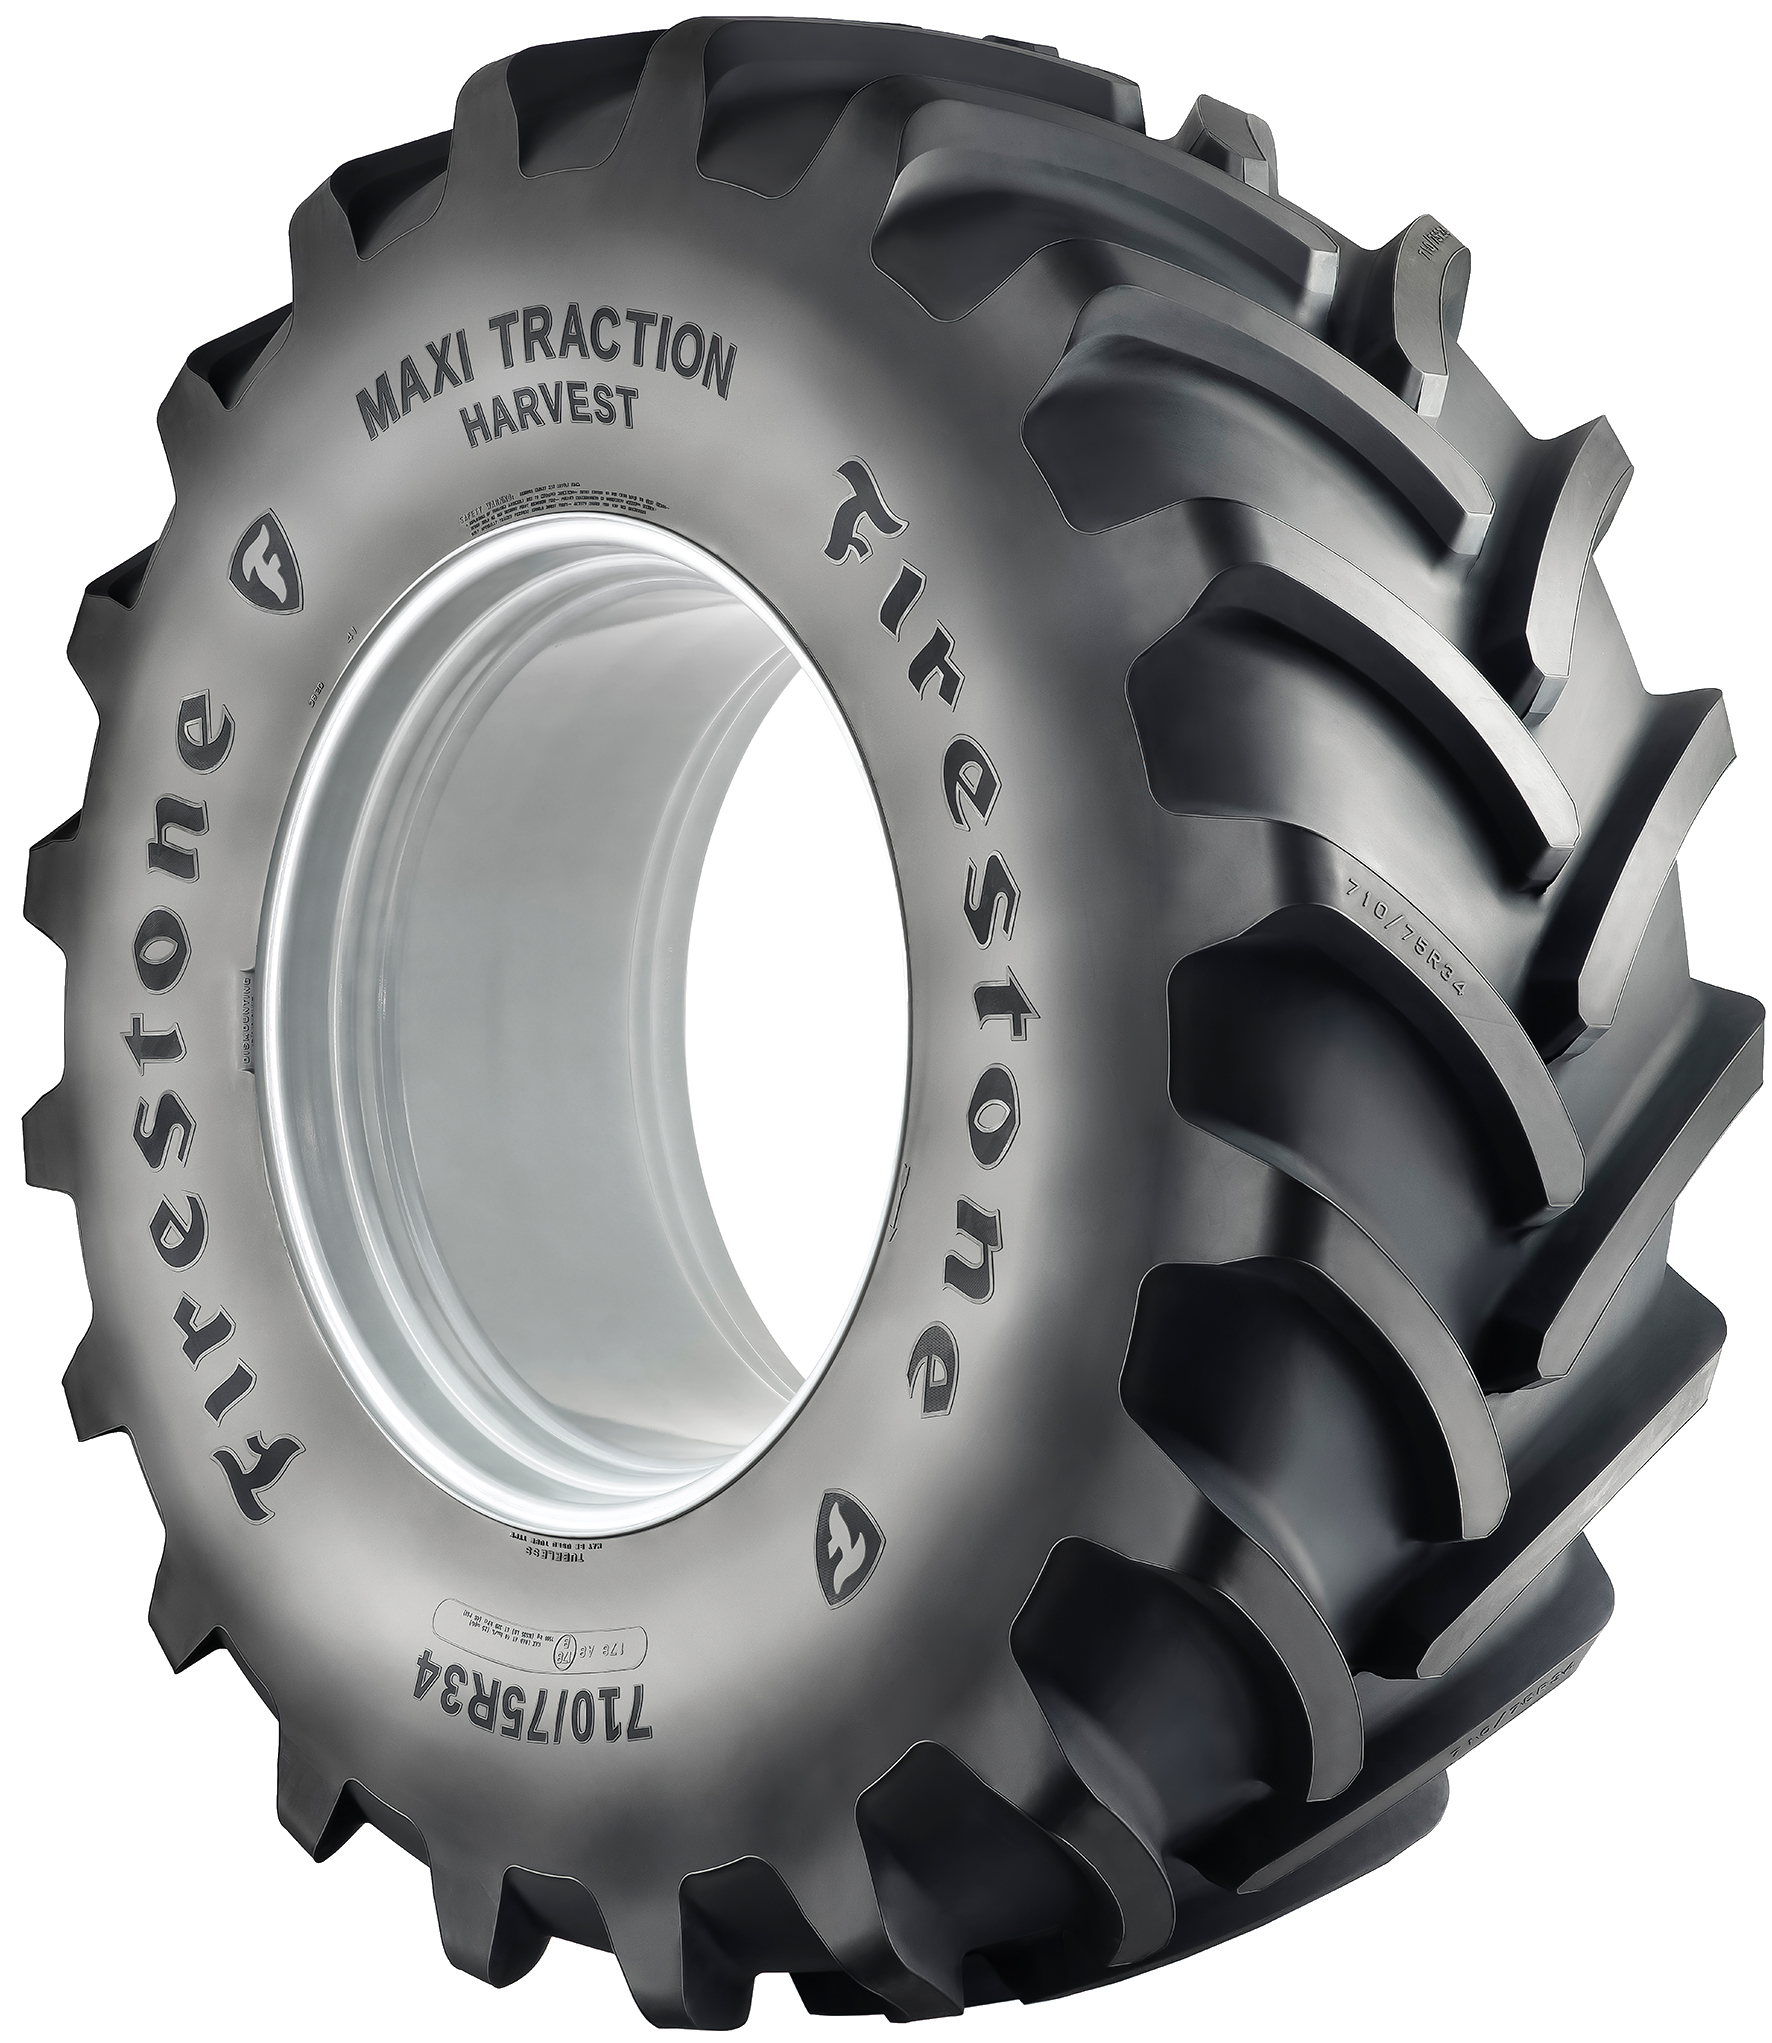 Firestone launches Maxi Traction Harvest tyre